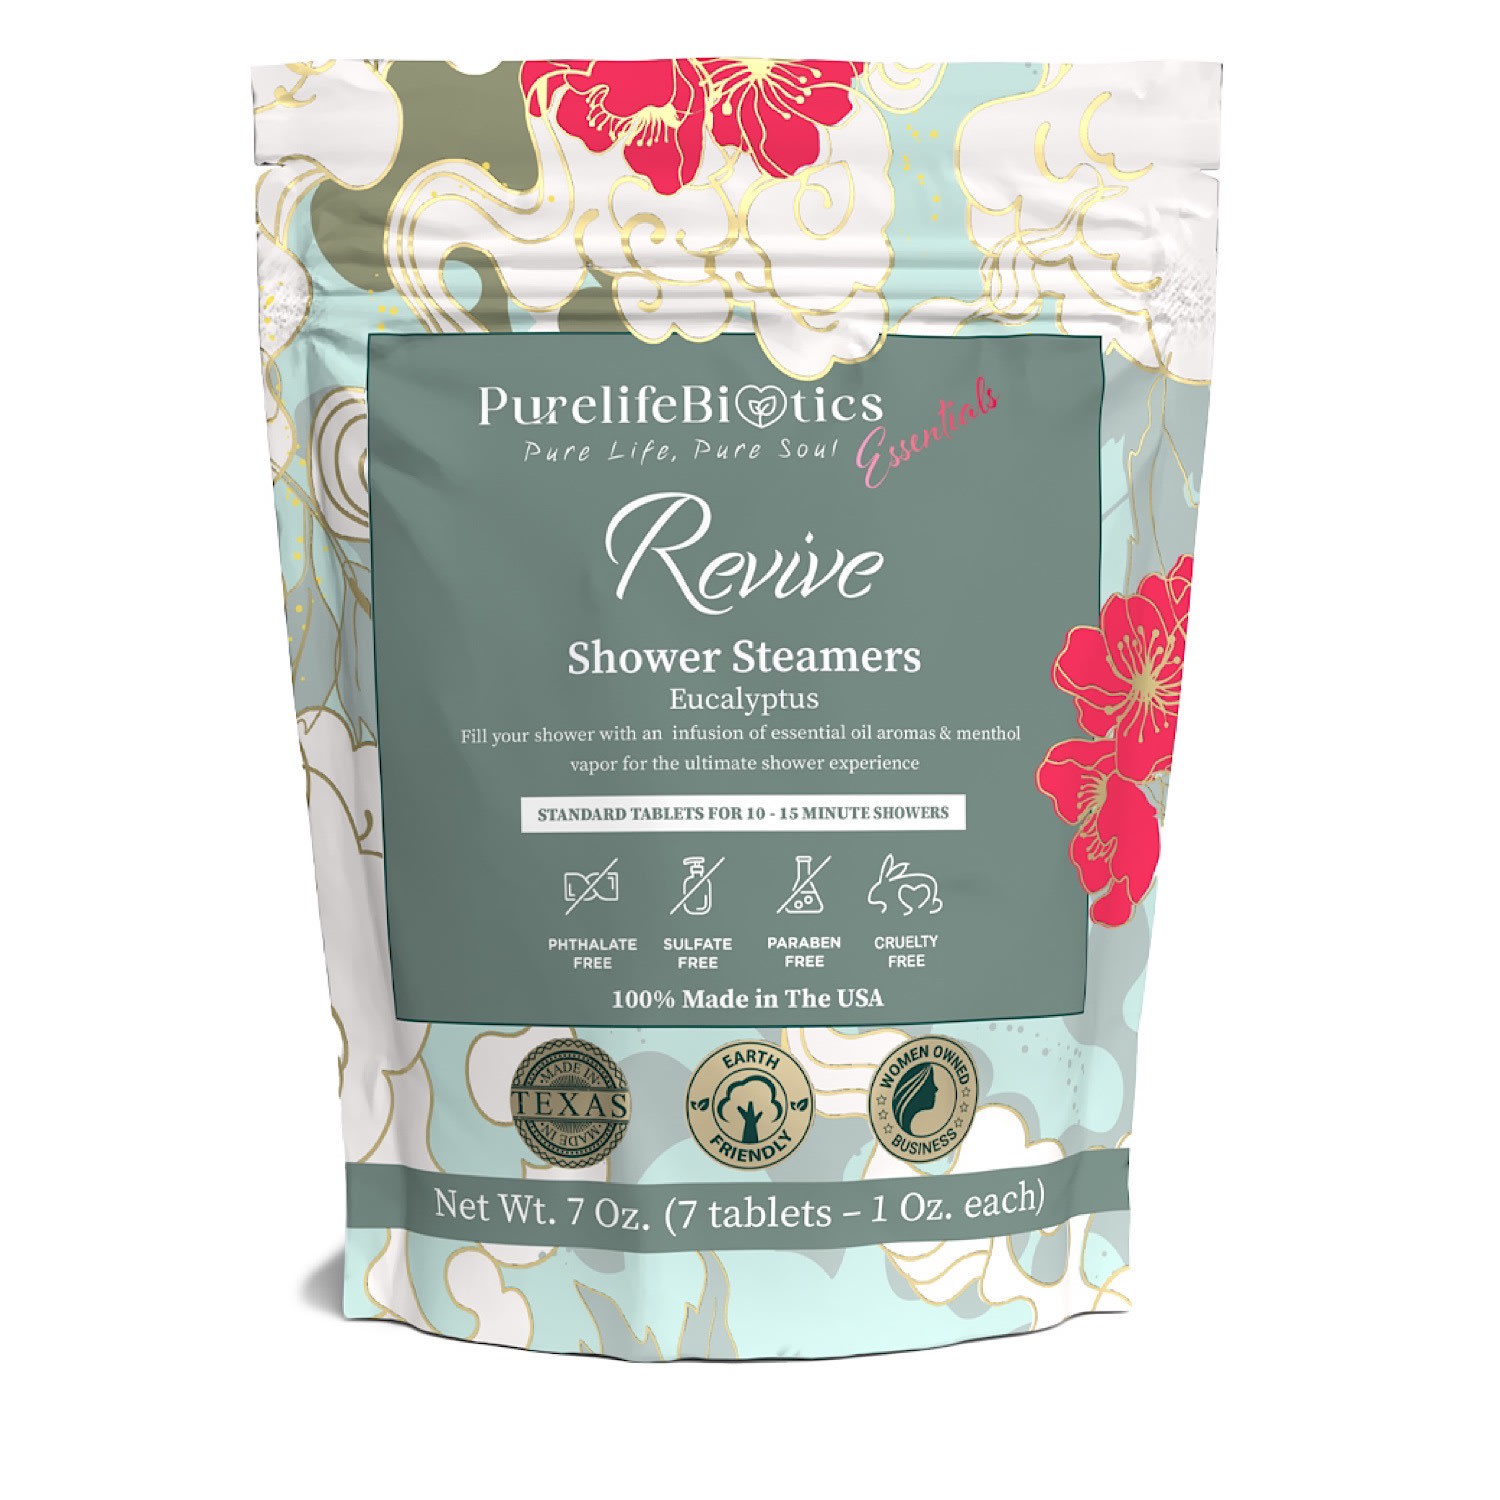 Revive Shower Steamers One Size Purelifebiotics